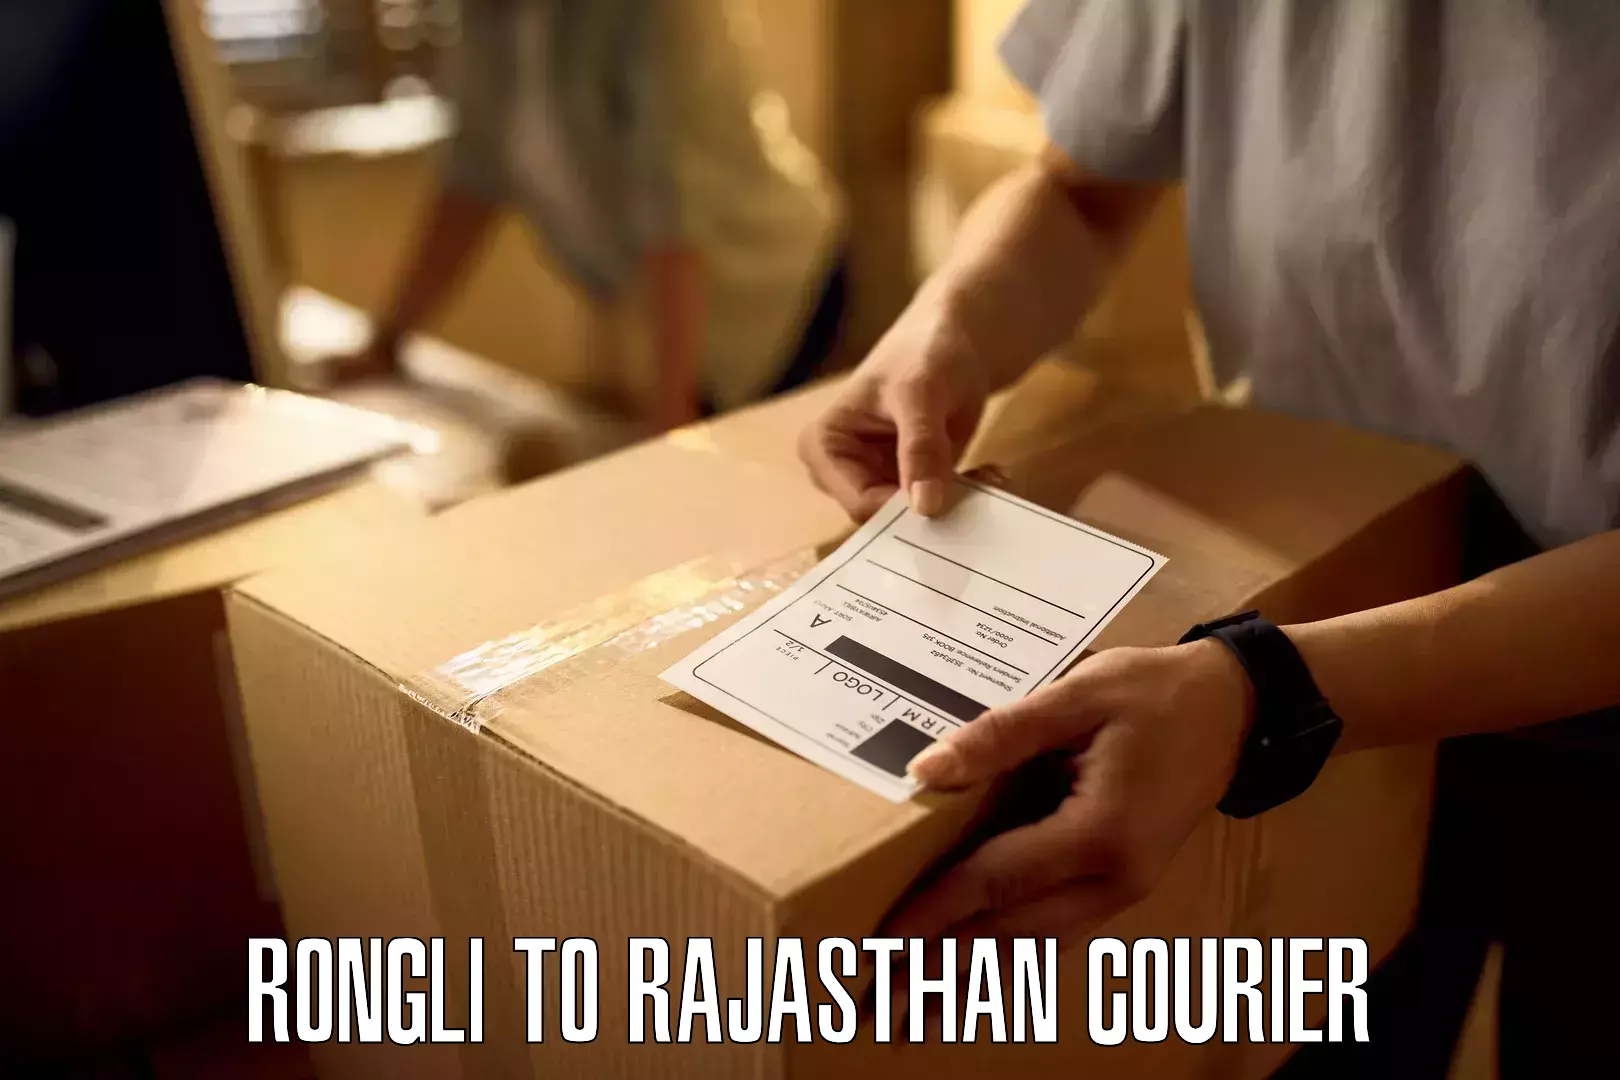 Easy return solutions in Rongli to Jaipur